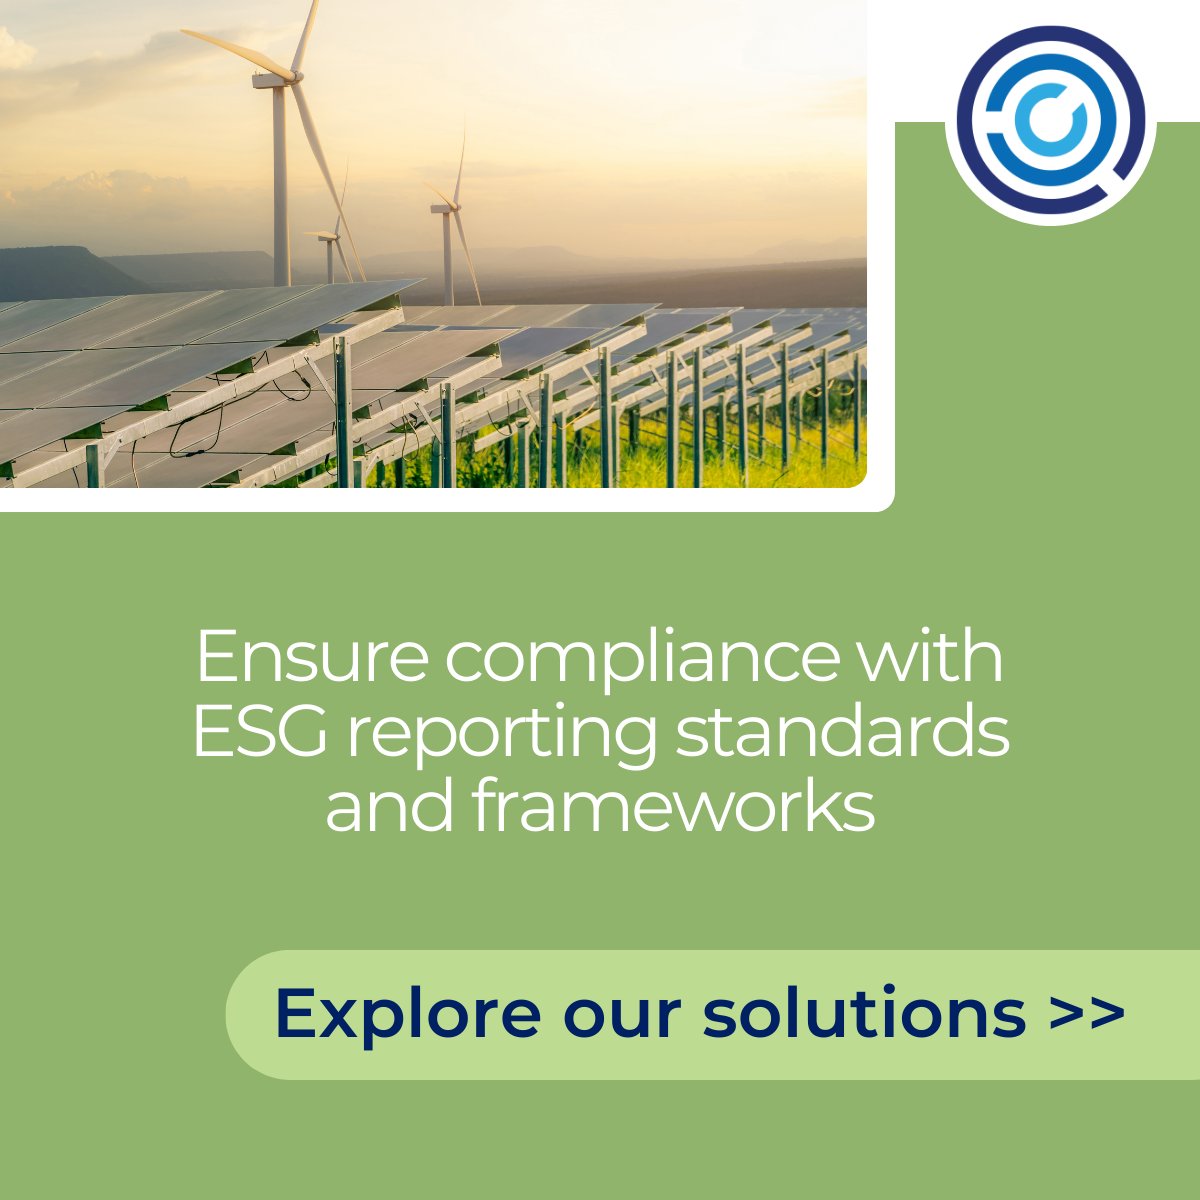 Ensure data integrity and accurate reporting of Scope 1, 2 and 3 disclosures to meet compliance standards and #sustainability frameworks. Talk to us about our #ESGreporting solutions >> concentricsolutions.com/solutions/esg-… #carbonemissions #ghgemissions #carbonfootprint #emissionsmanagement